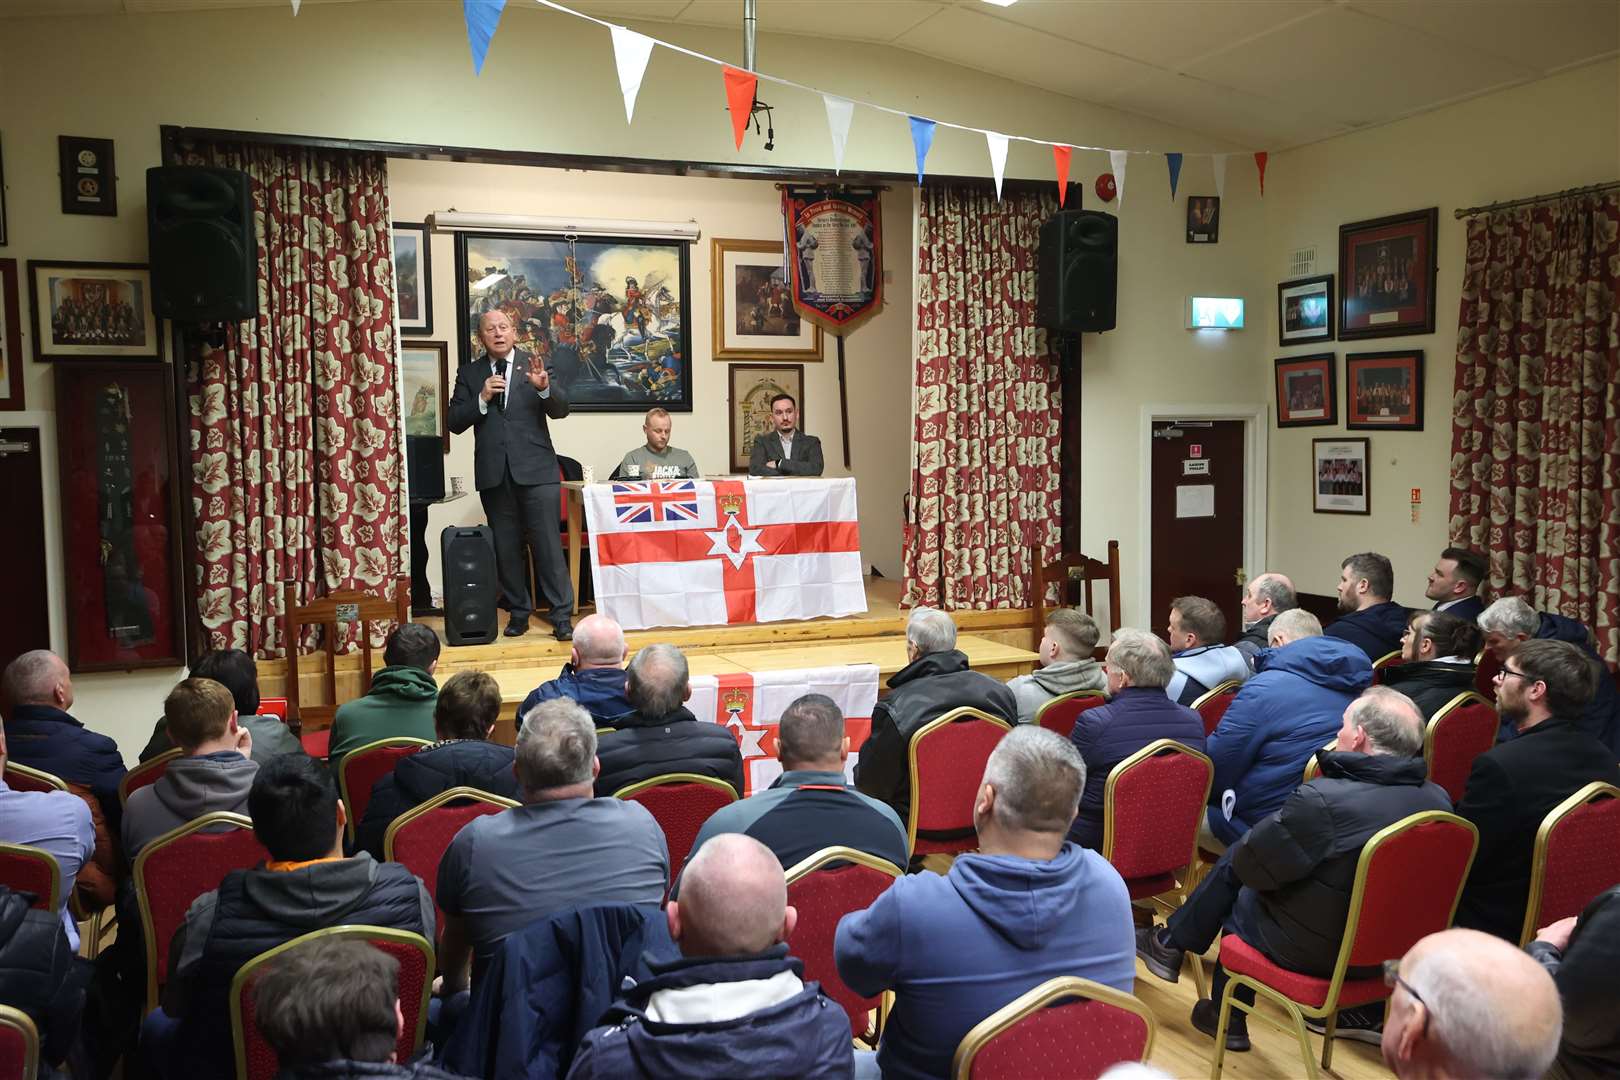 Around 120 people attended a meeting in protest at the DUP’s deal with the Government in Co Tyrone on Thursday (Liam McBurney/PA)